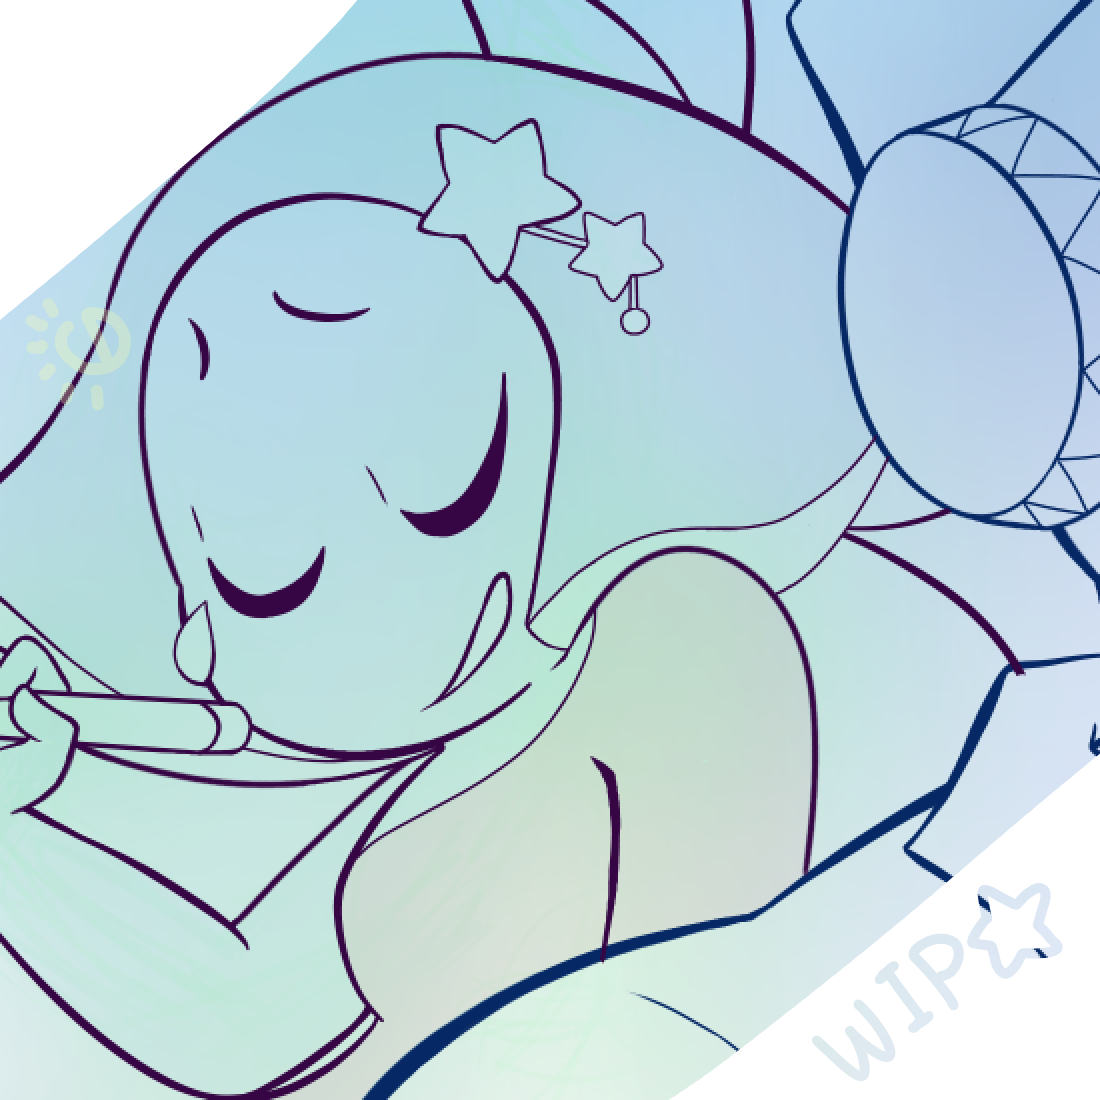 Just a small wip of what I’m working on for the @sudecadencezine!– normally I’d have something finished to post by now but I’m juggling at least four different projects and work right now, but I will...